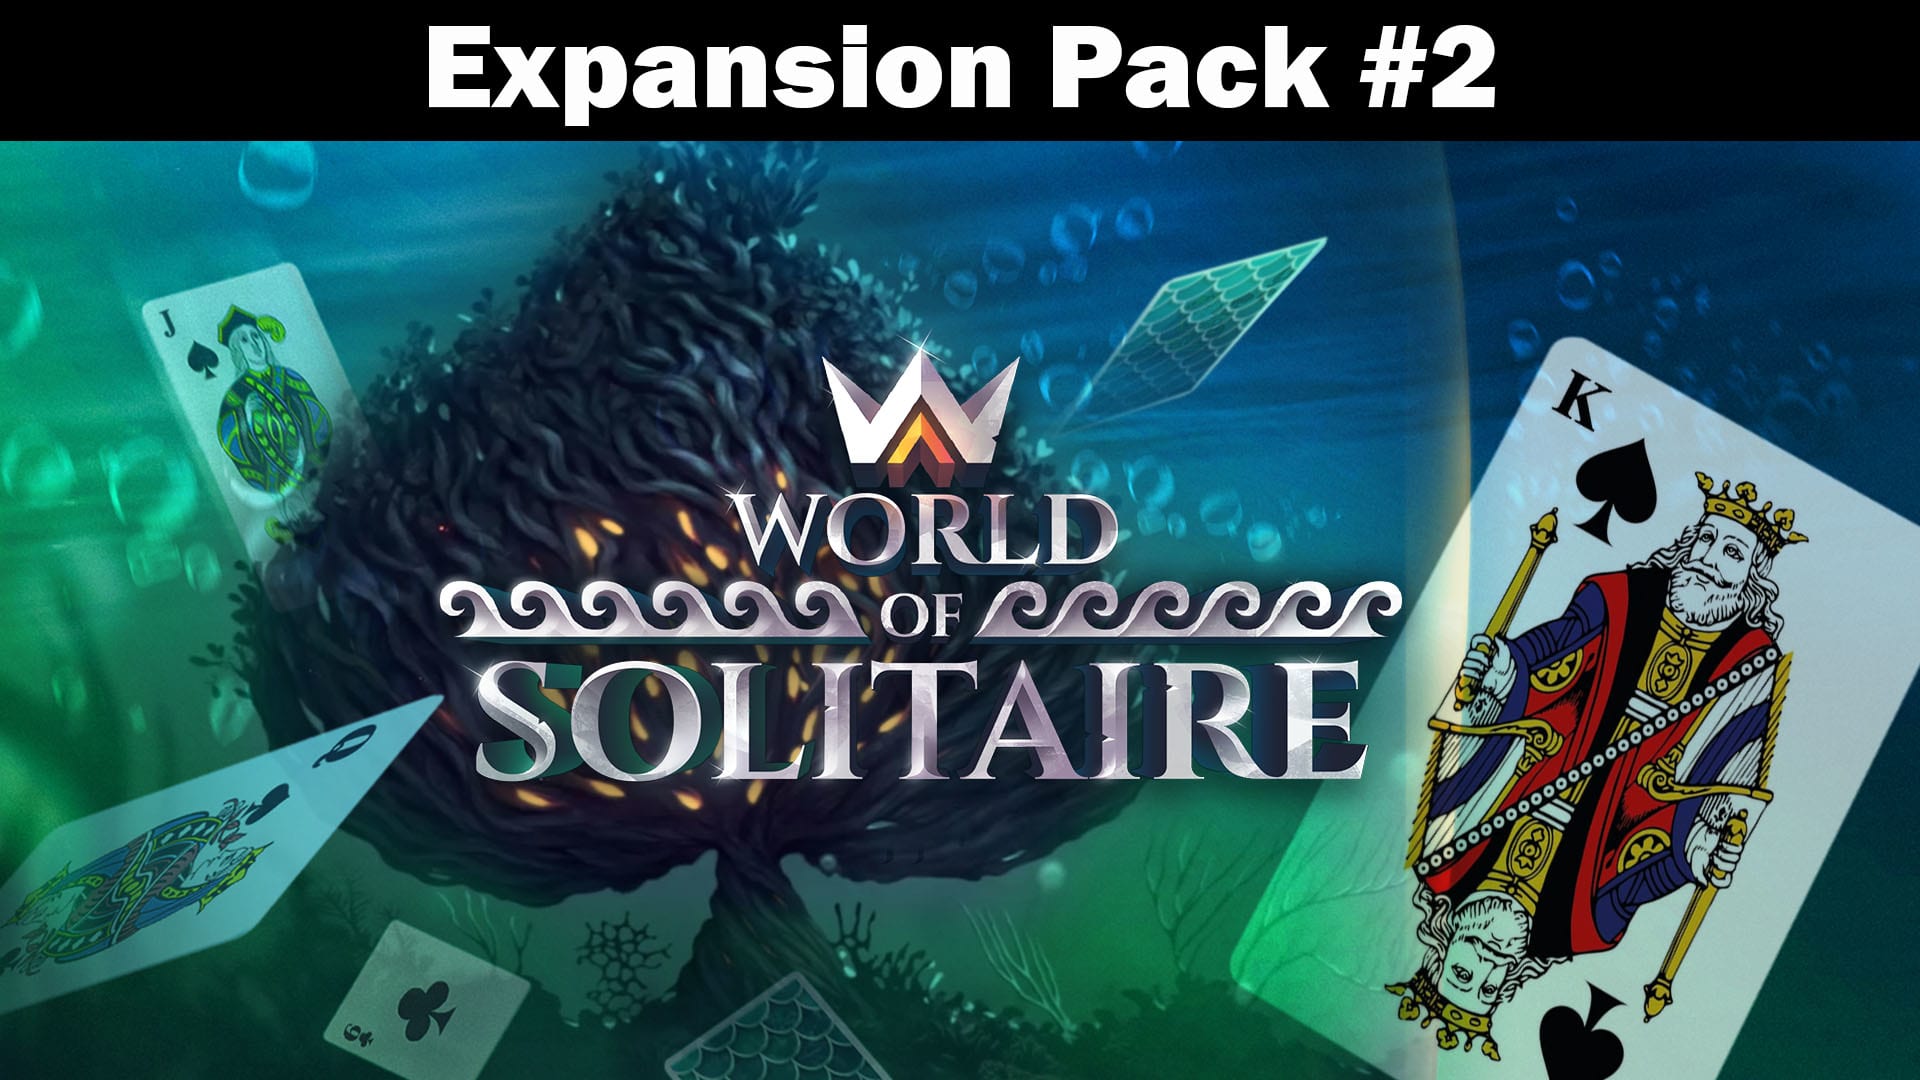 World of Solitaire: Expansion Pack #2